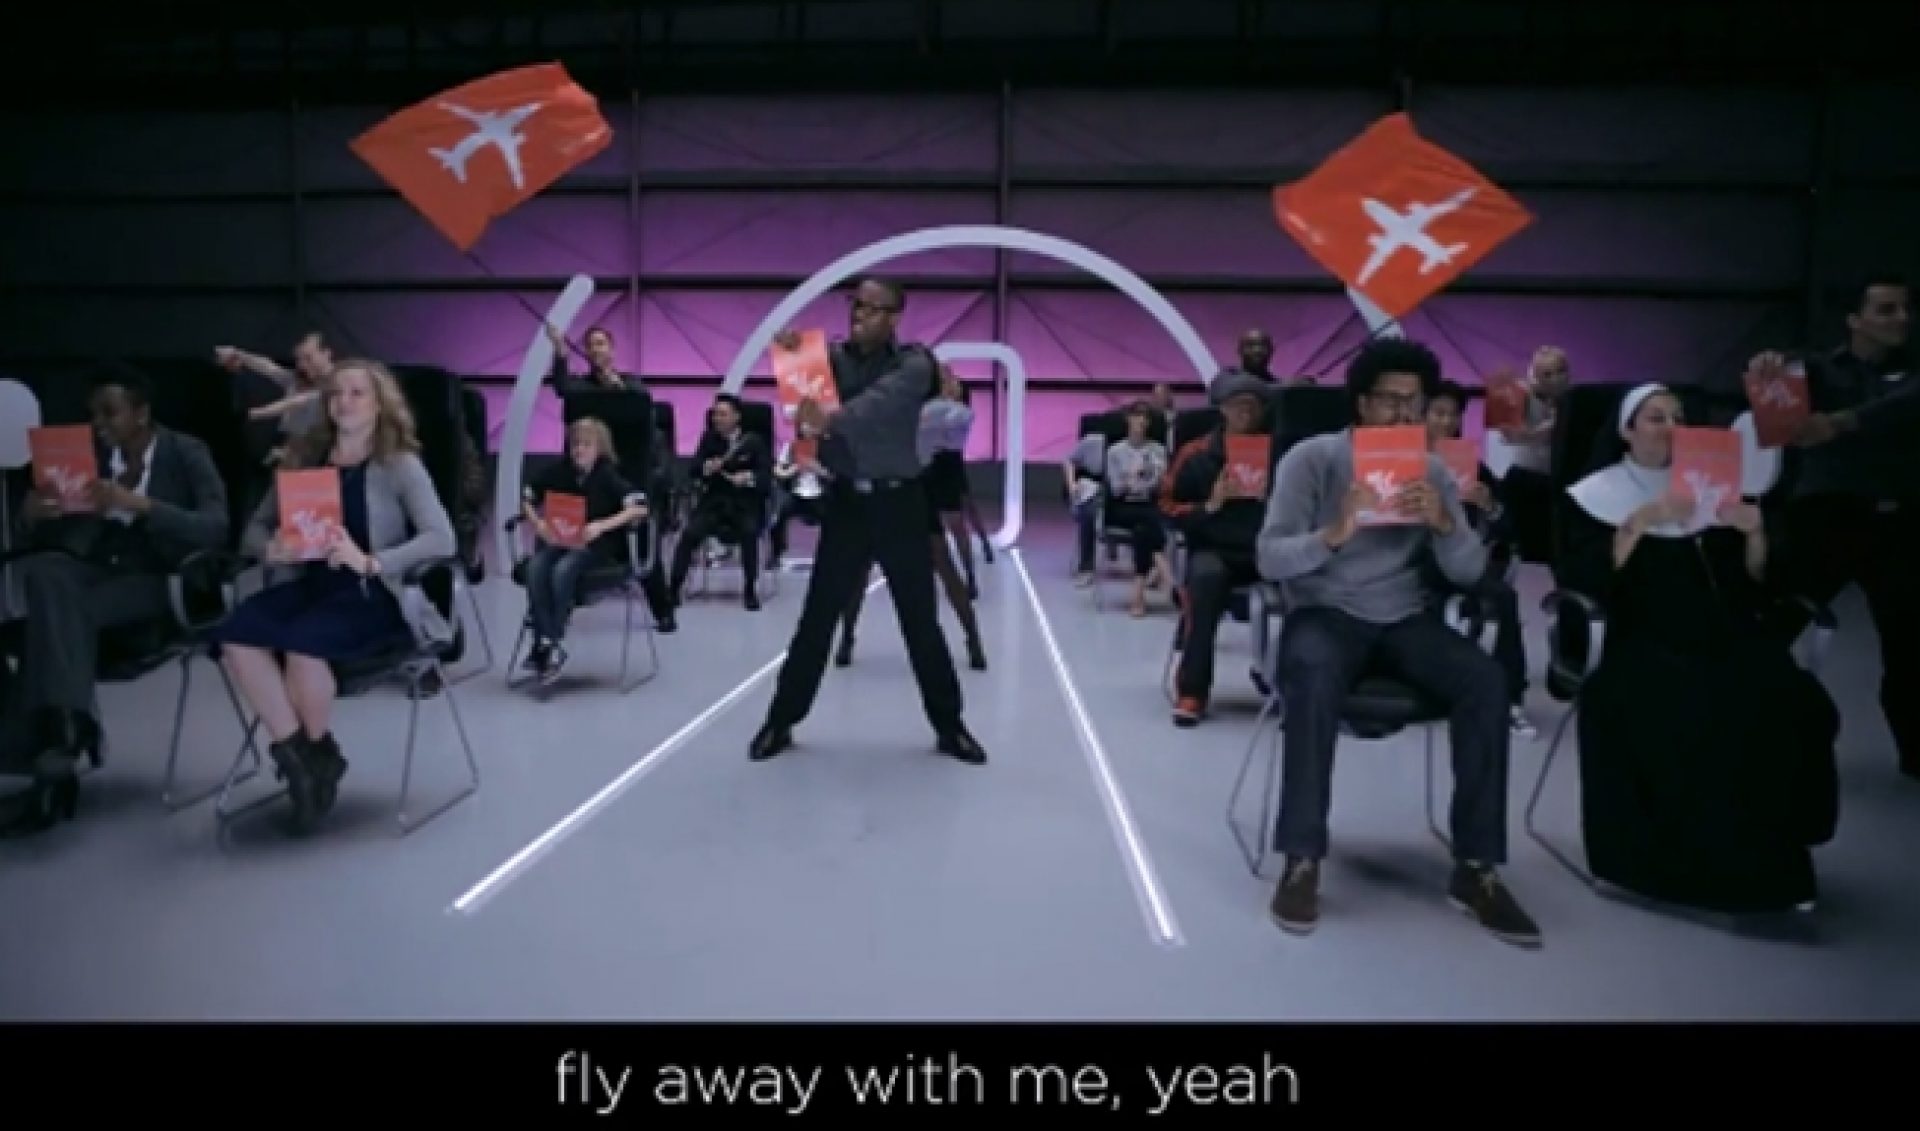 Audition To Be In Virgin America’s Next In-Flight Safety Video